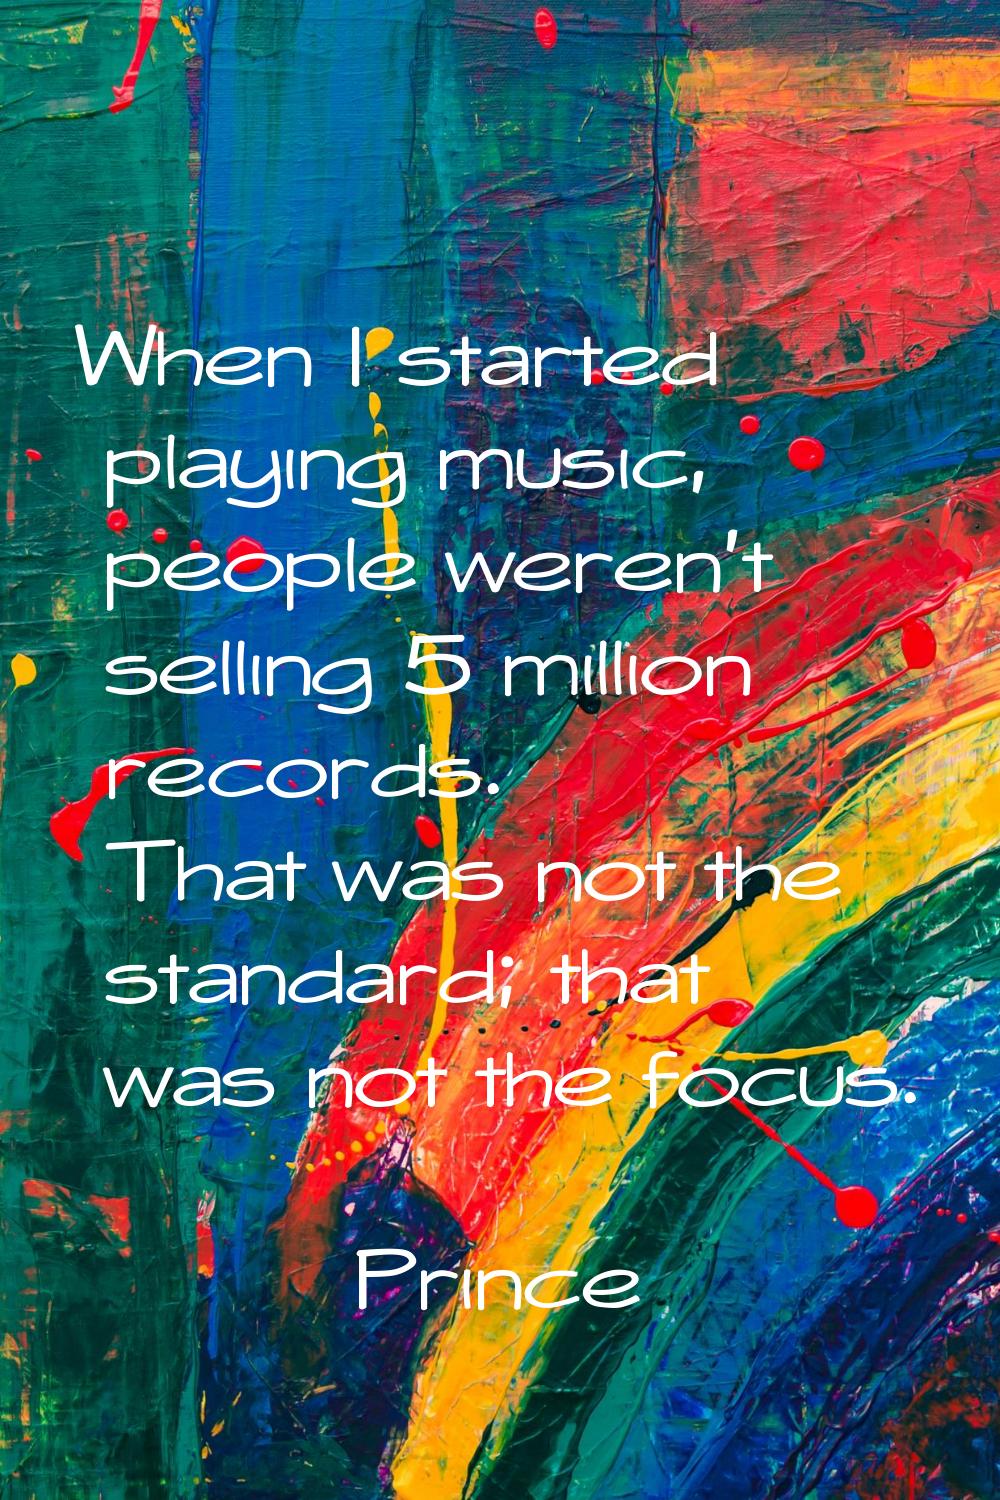 When I started playing music, people weren't selling 5 million records. That was not the standard; 